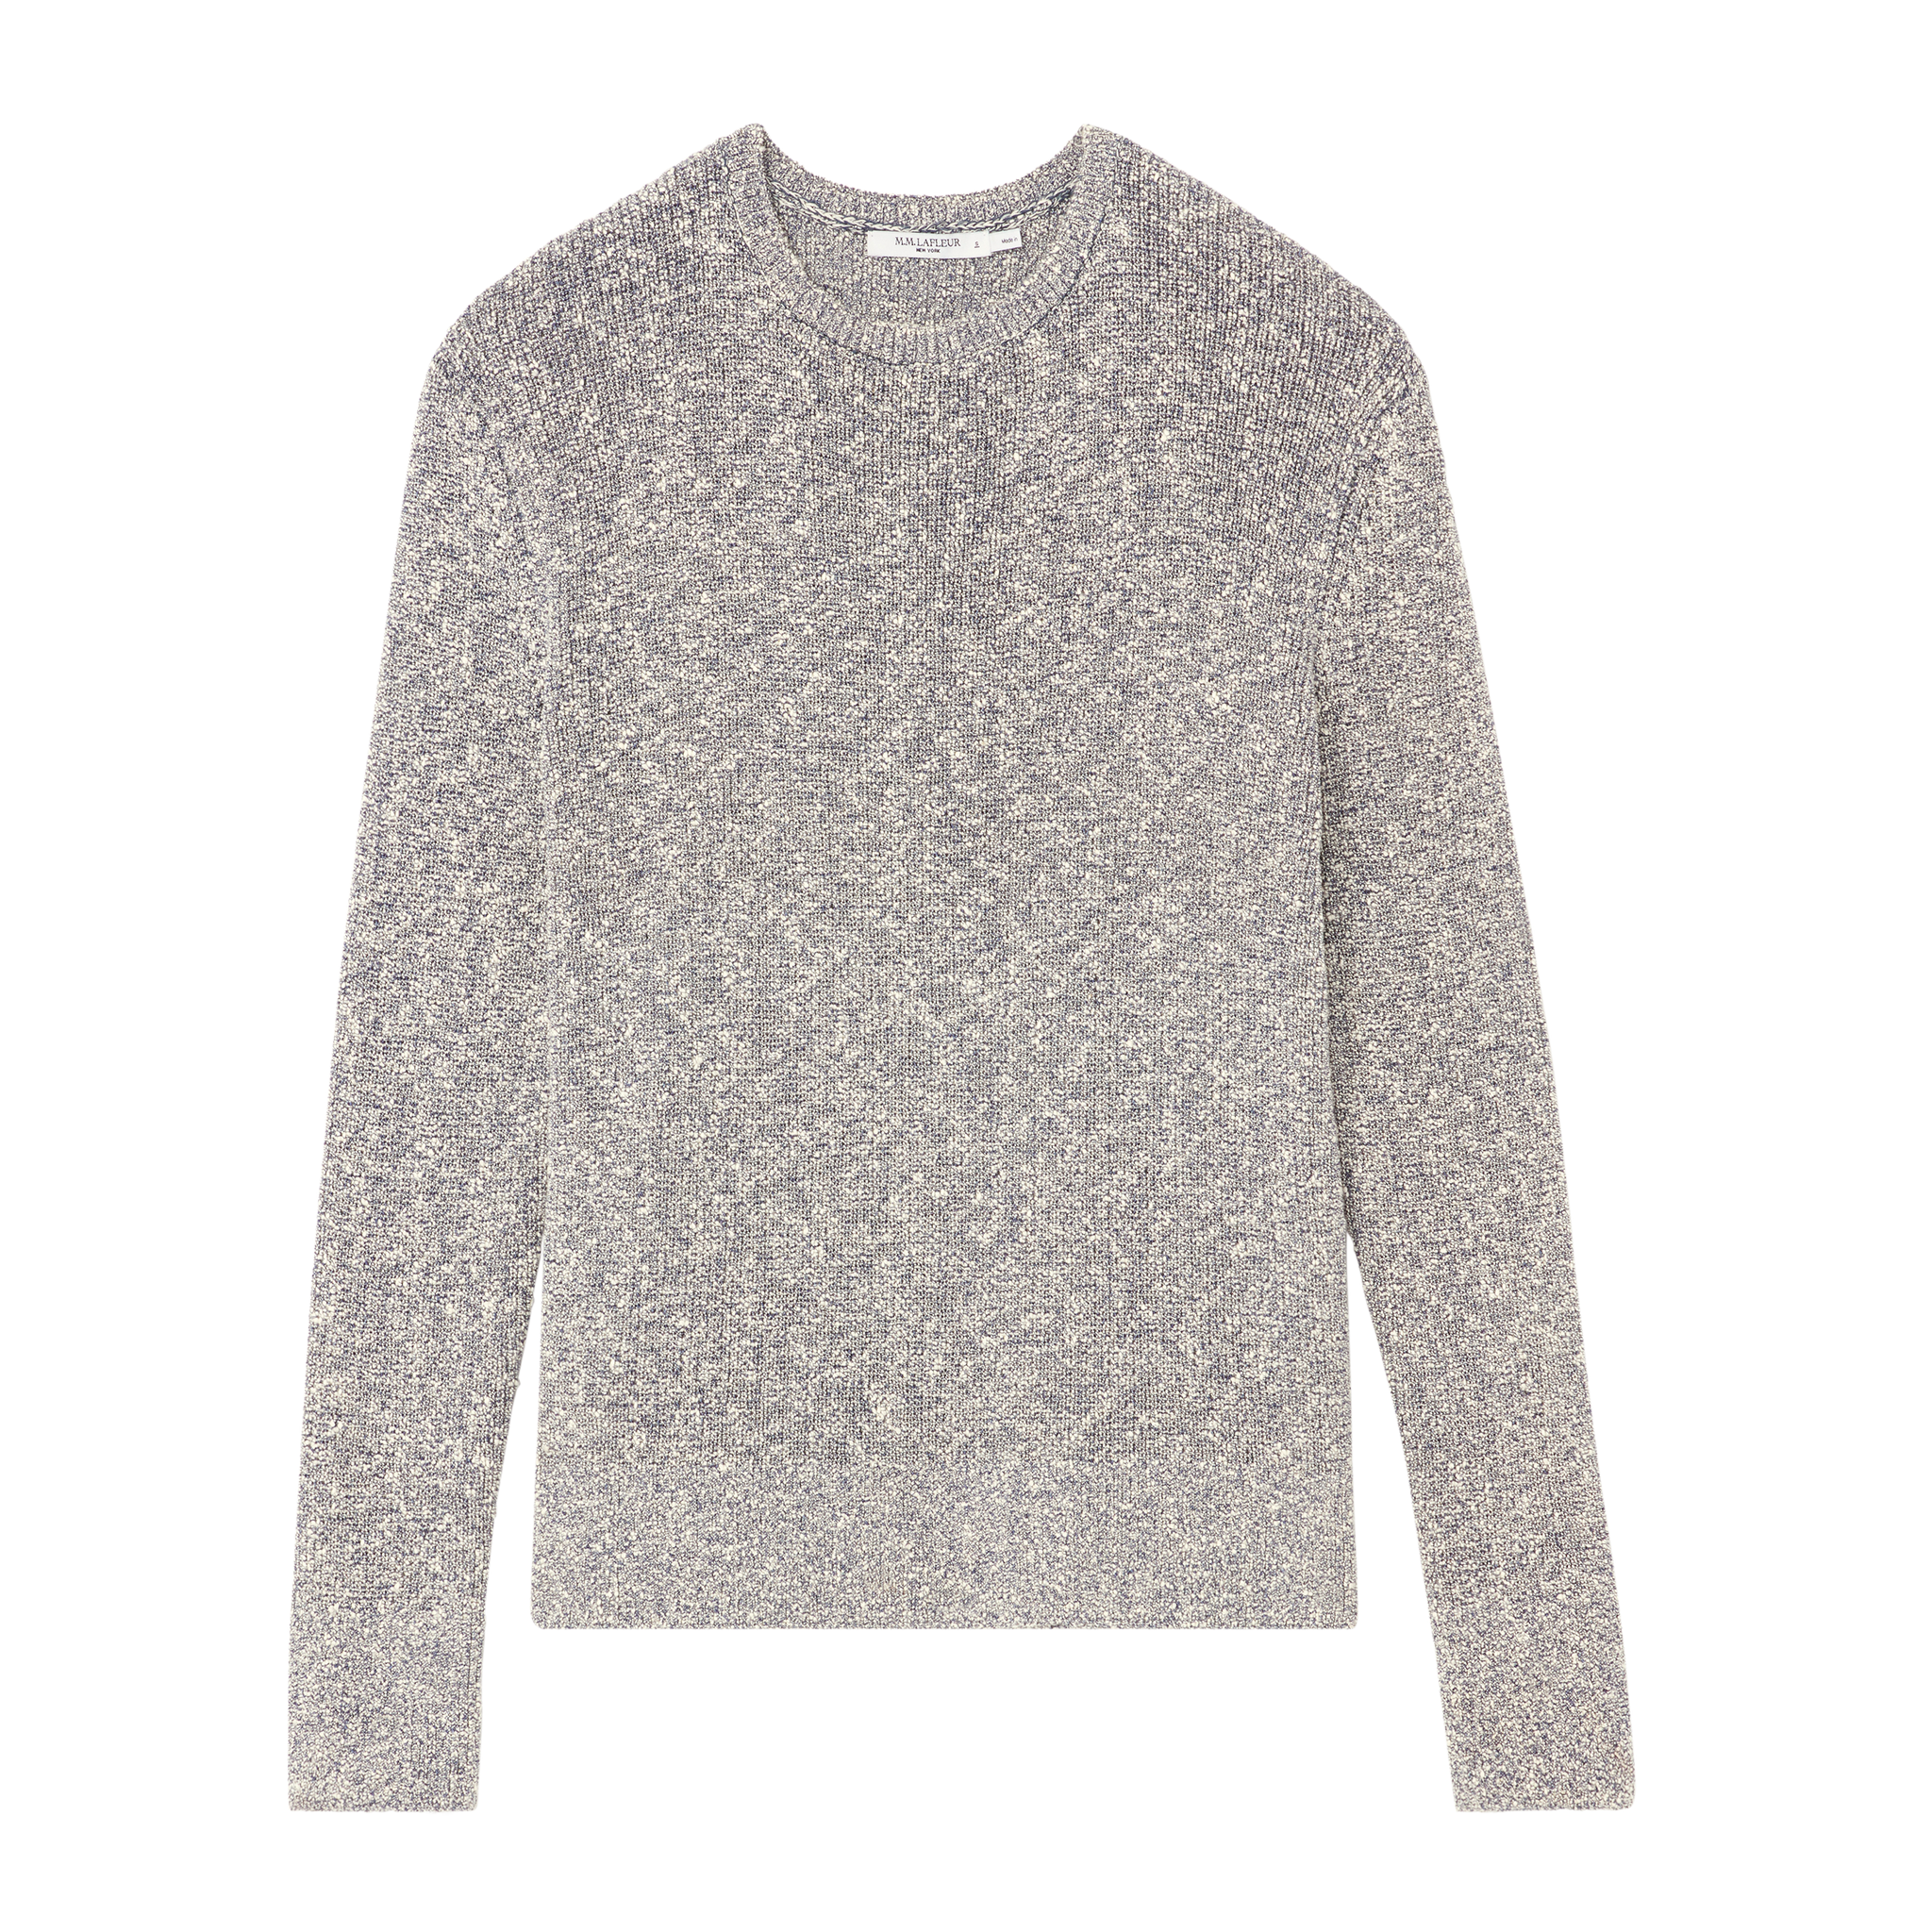 Packshot image of the Butler Sweater—Knit Boucle in Black / White